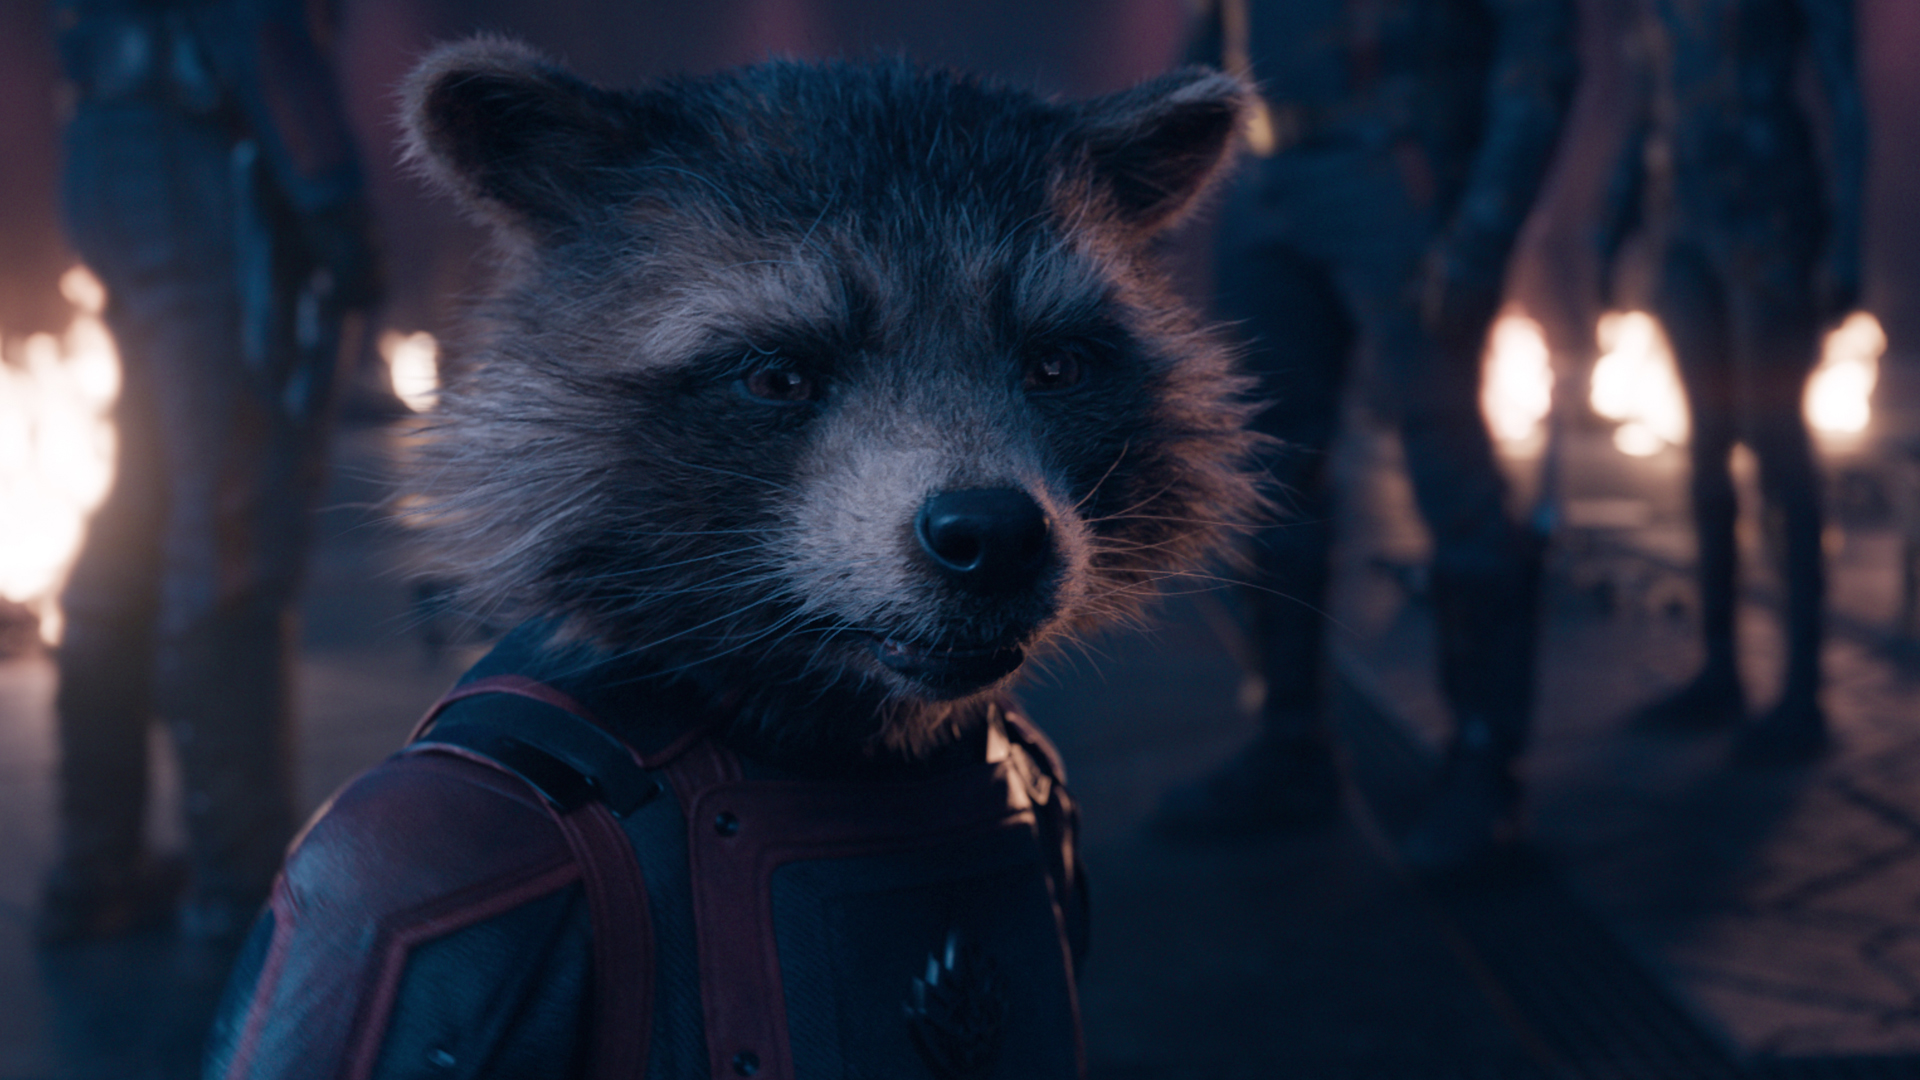 A forlorn Rocket looks at someone off screen in Guardians of the Galaxy 3